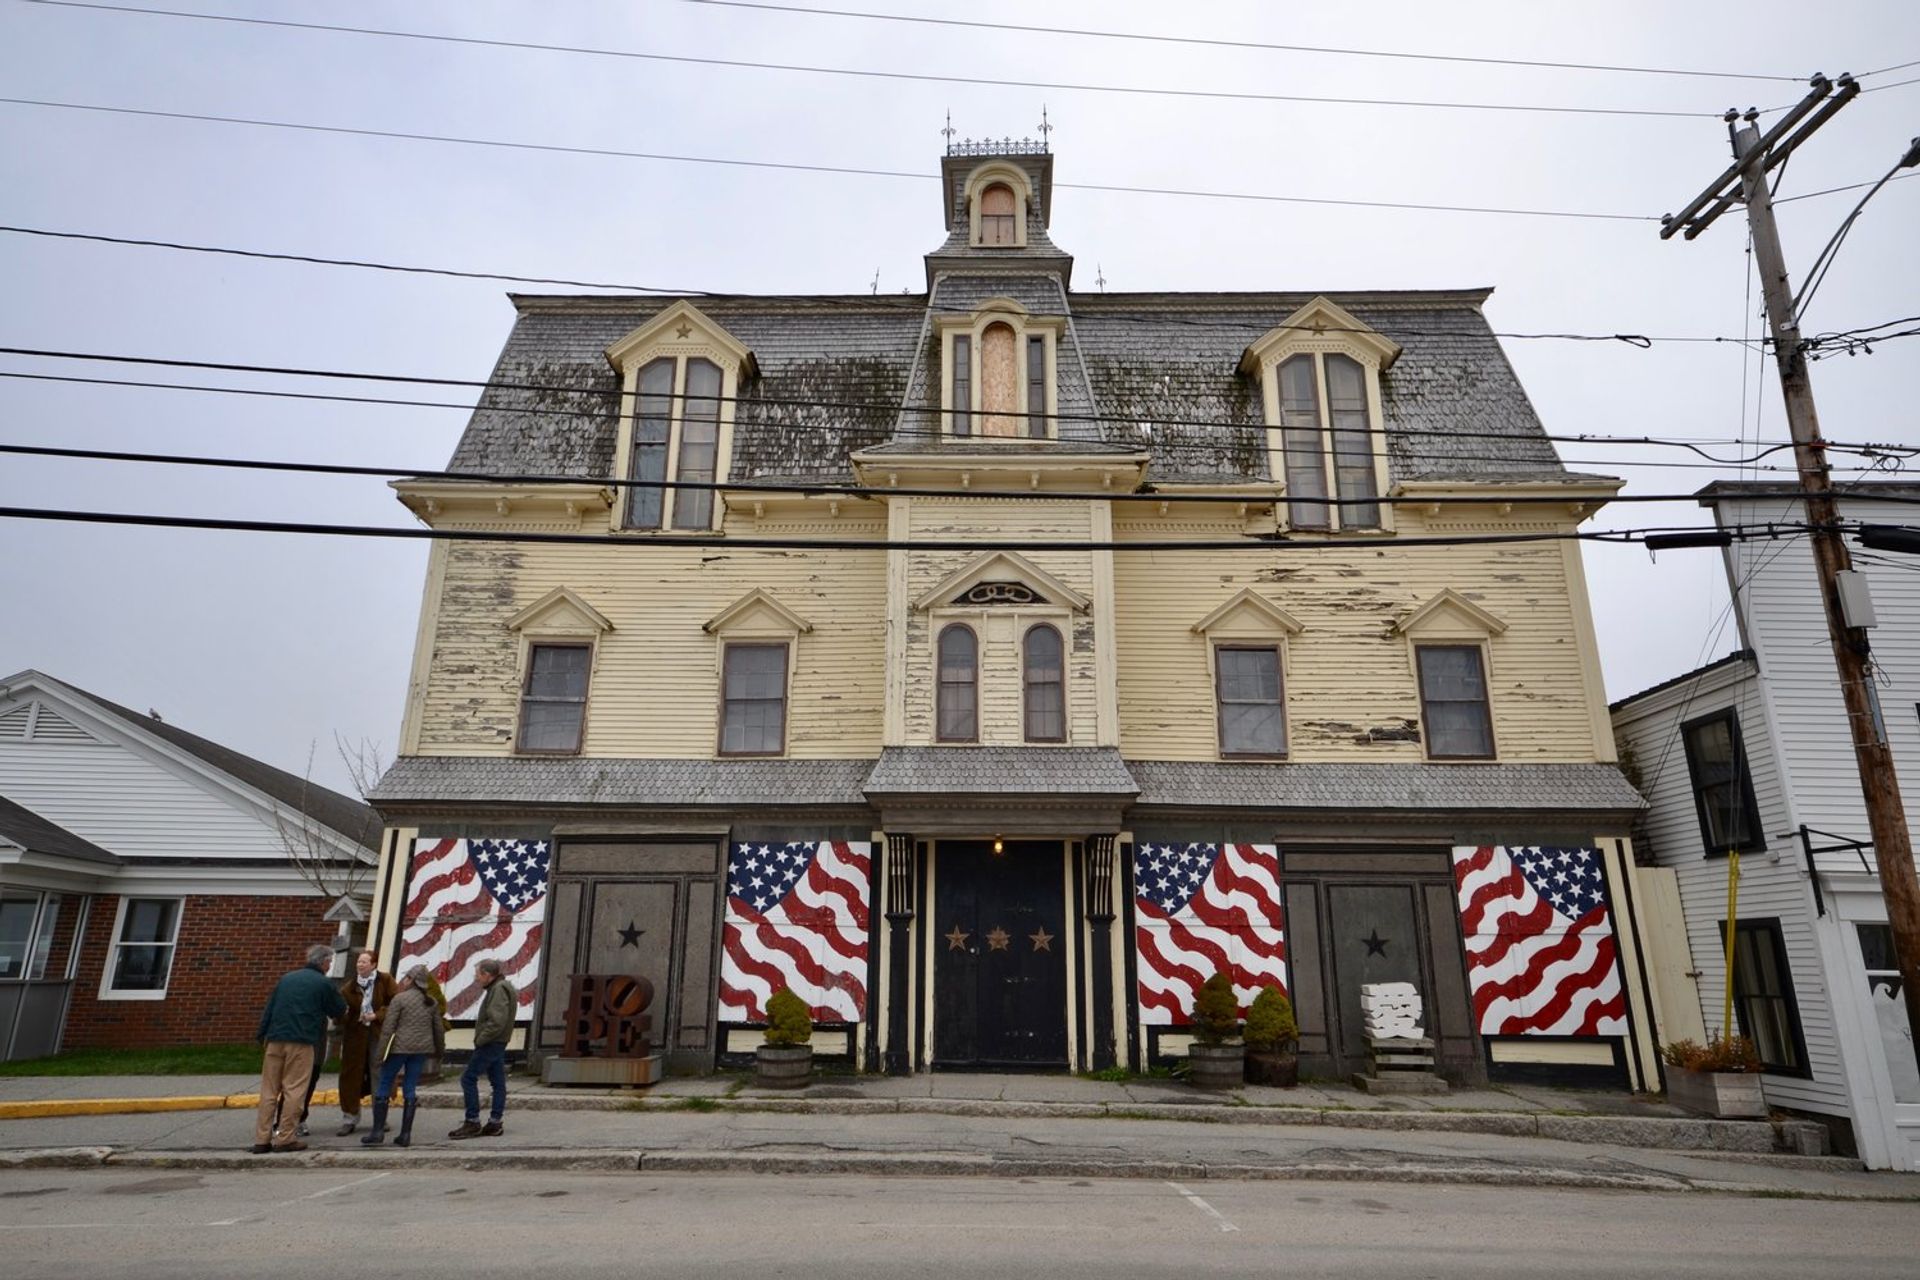 The Star of Hope Foundation is working to turn the artist Robert Indiana's former home on the island of Vinalhaven, Maine into a museum Photo: Maine Preservation